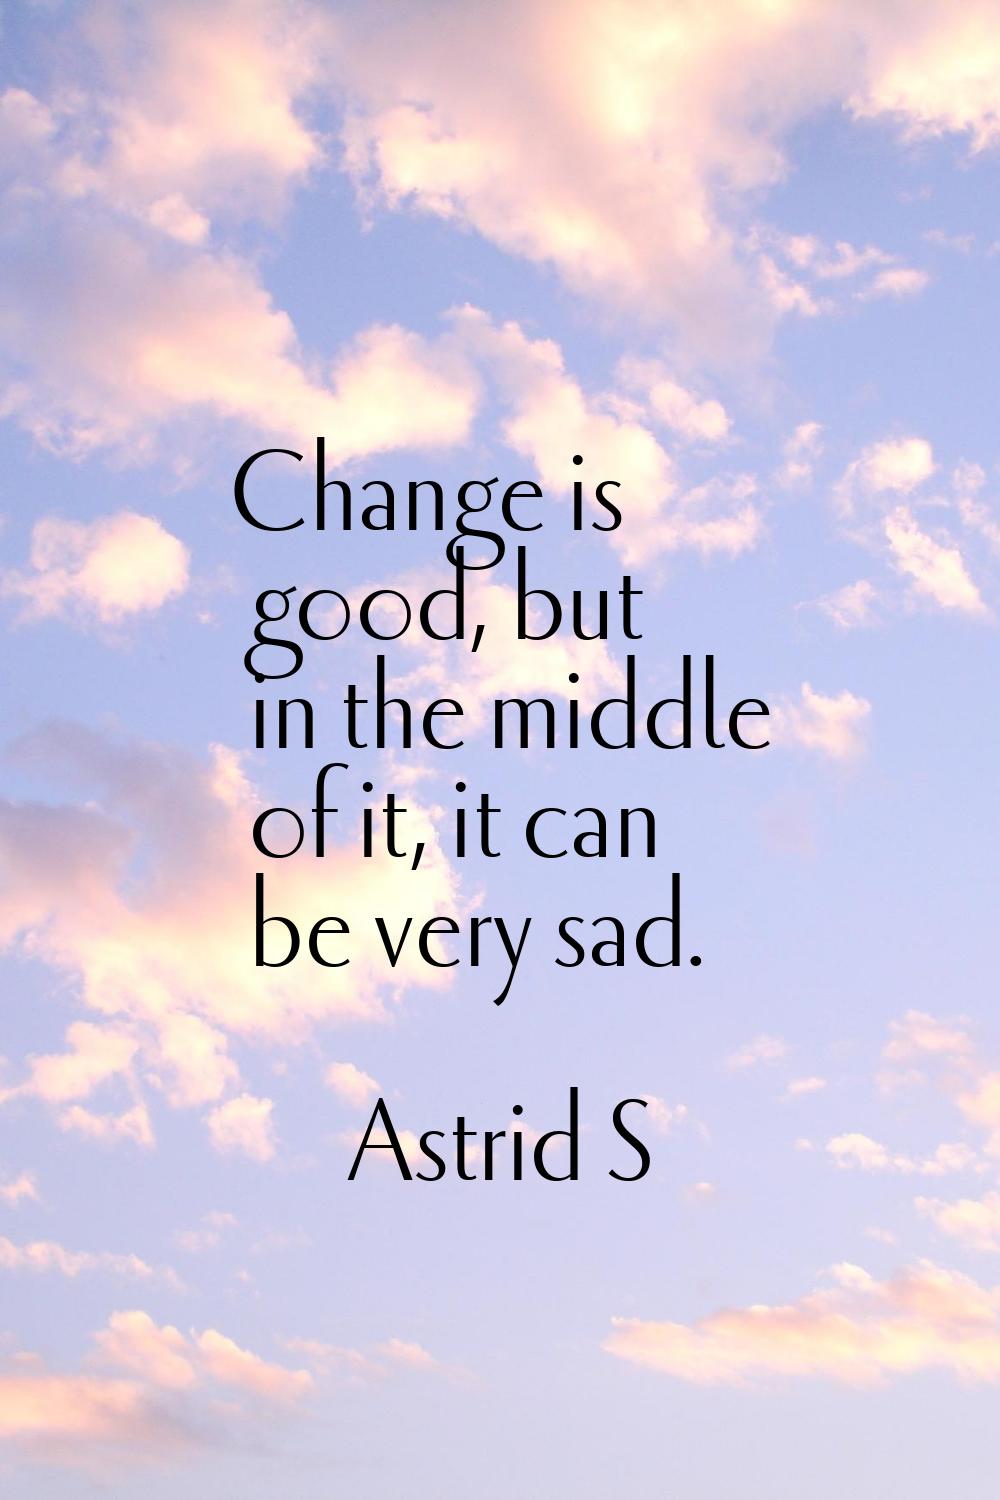 Change is good, but in the middle of it, it can be very sad.